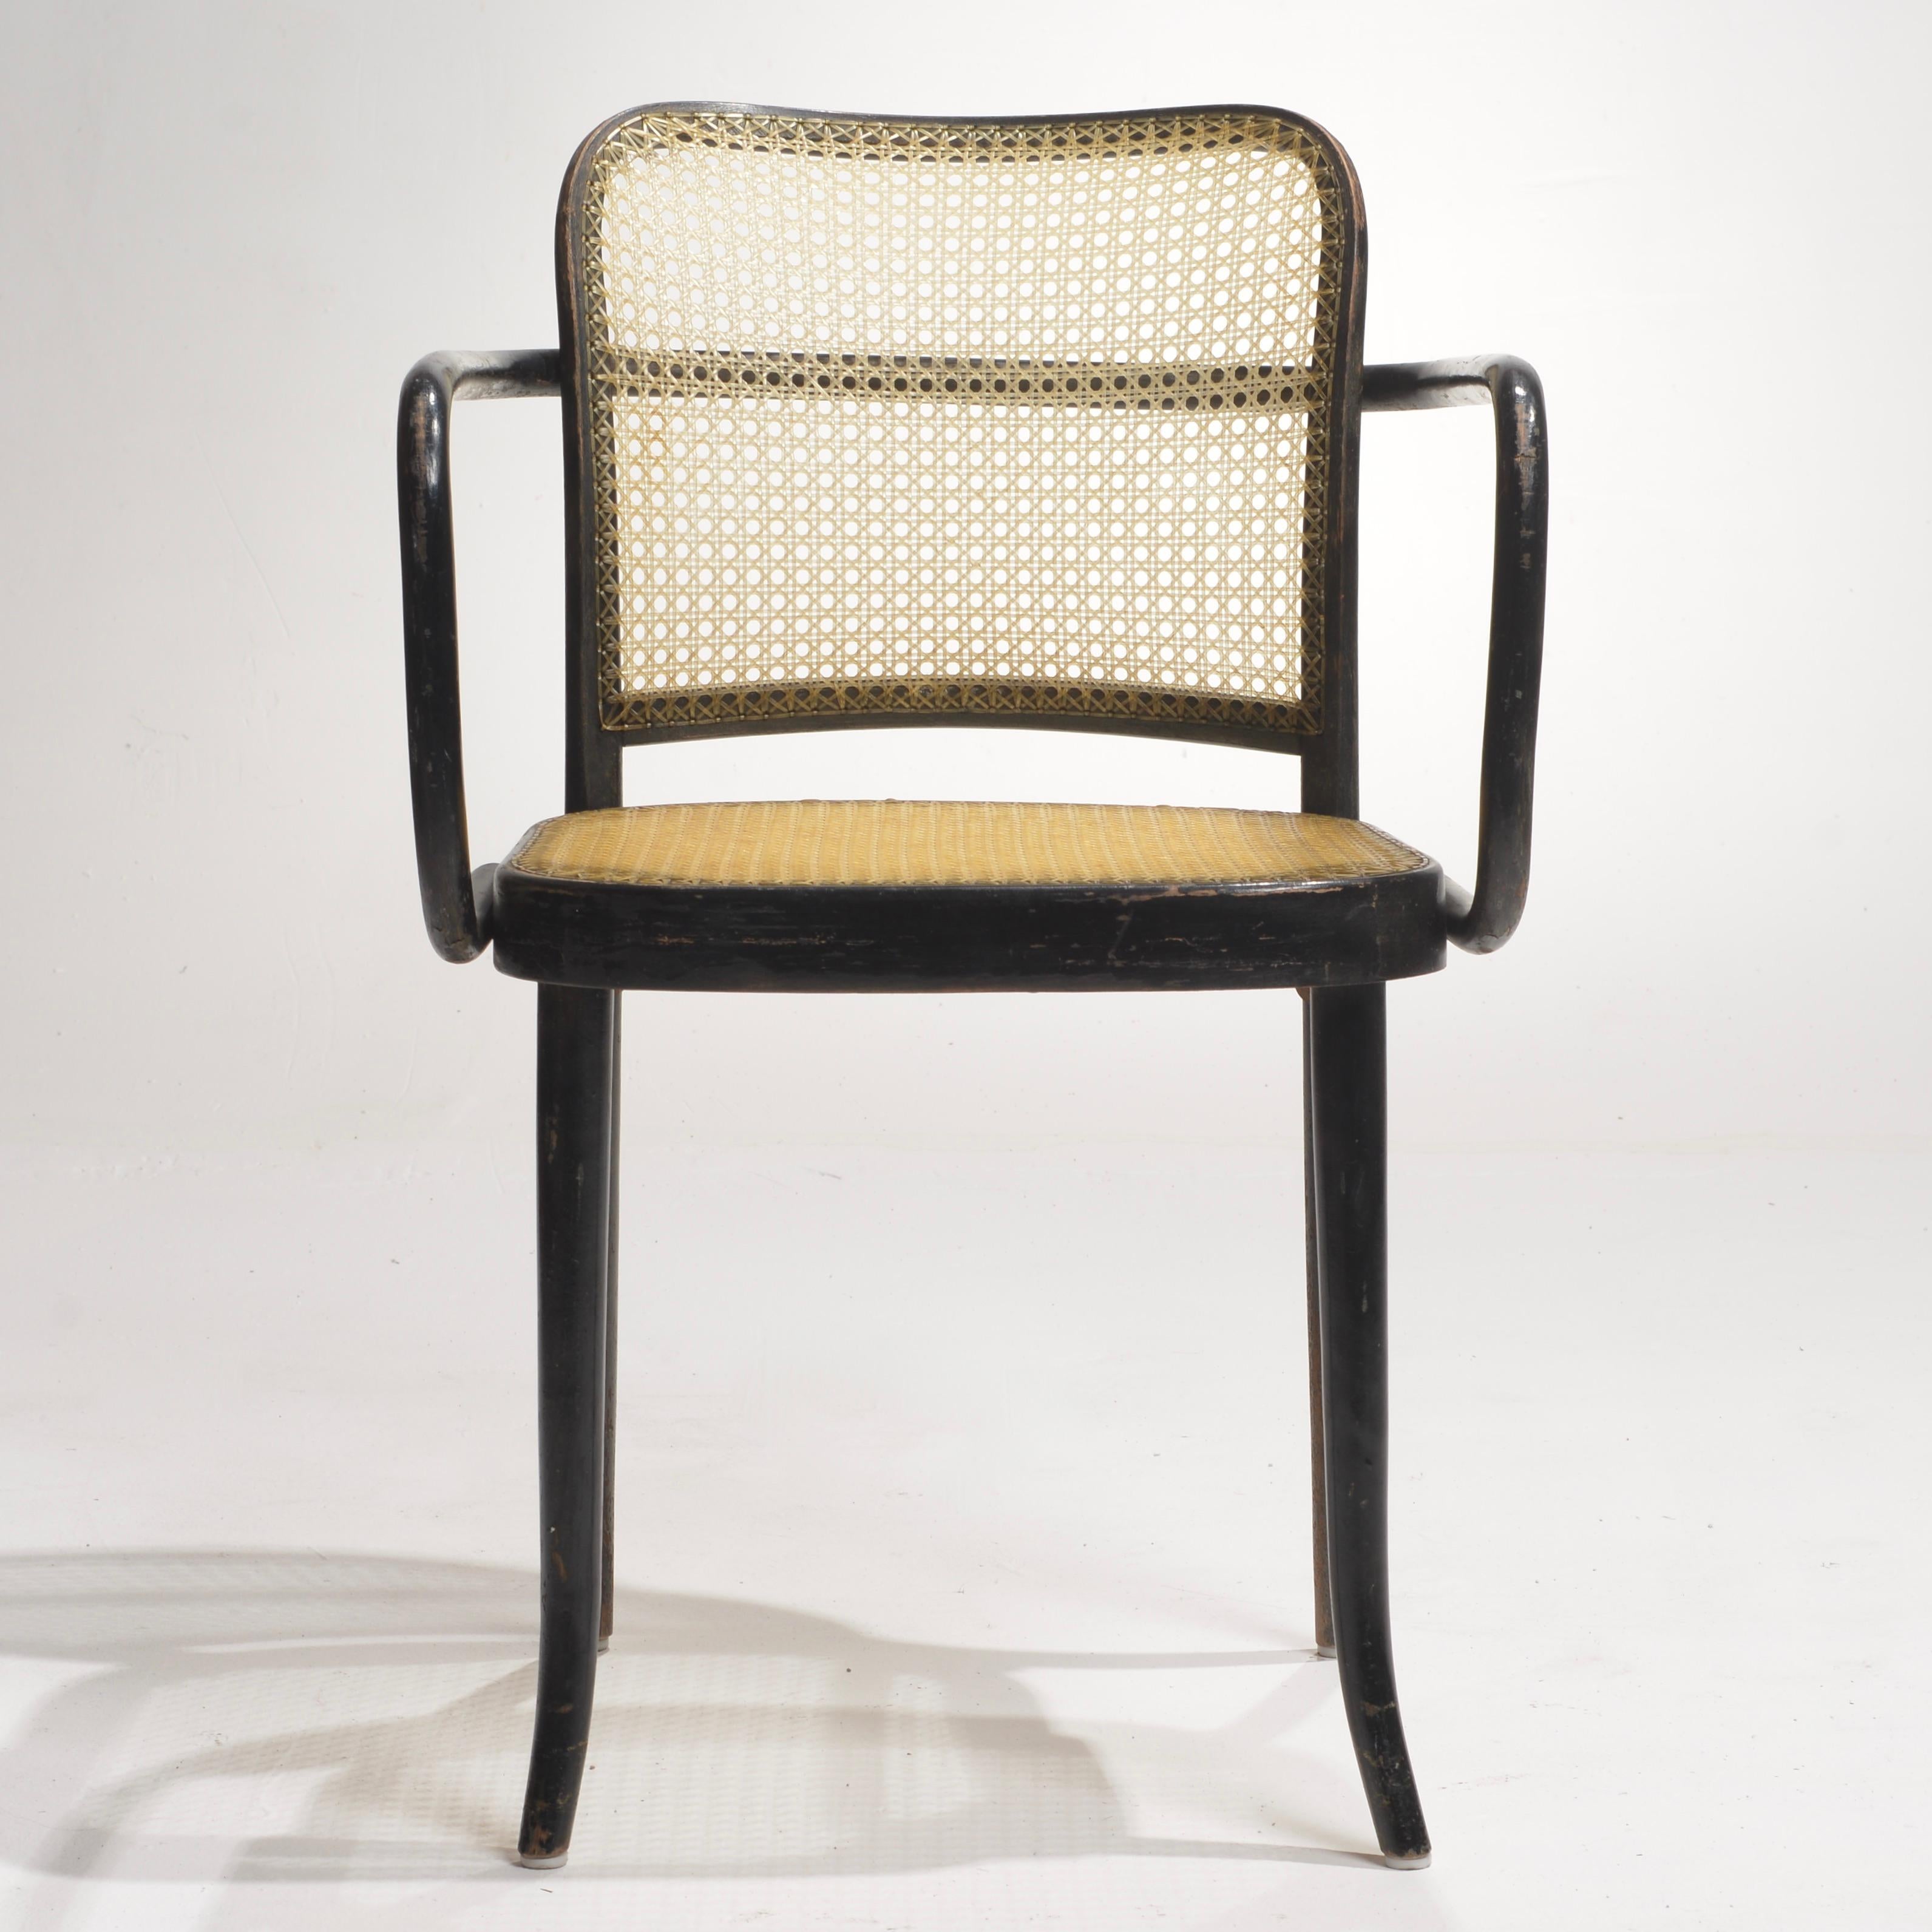 In the 1920s, Michael Thonet's company crafted the iconic No. 811 Bentwood Chair.  Josef Hoffmann is commonly credited with creating the 